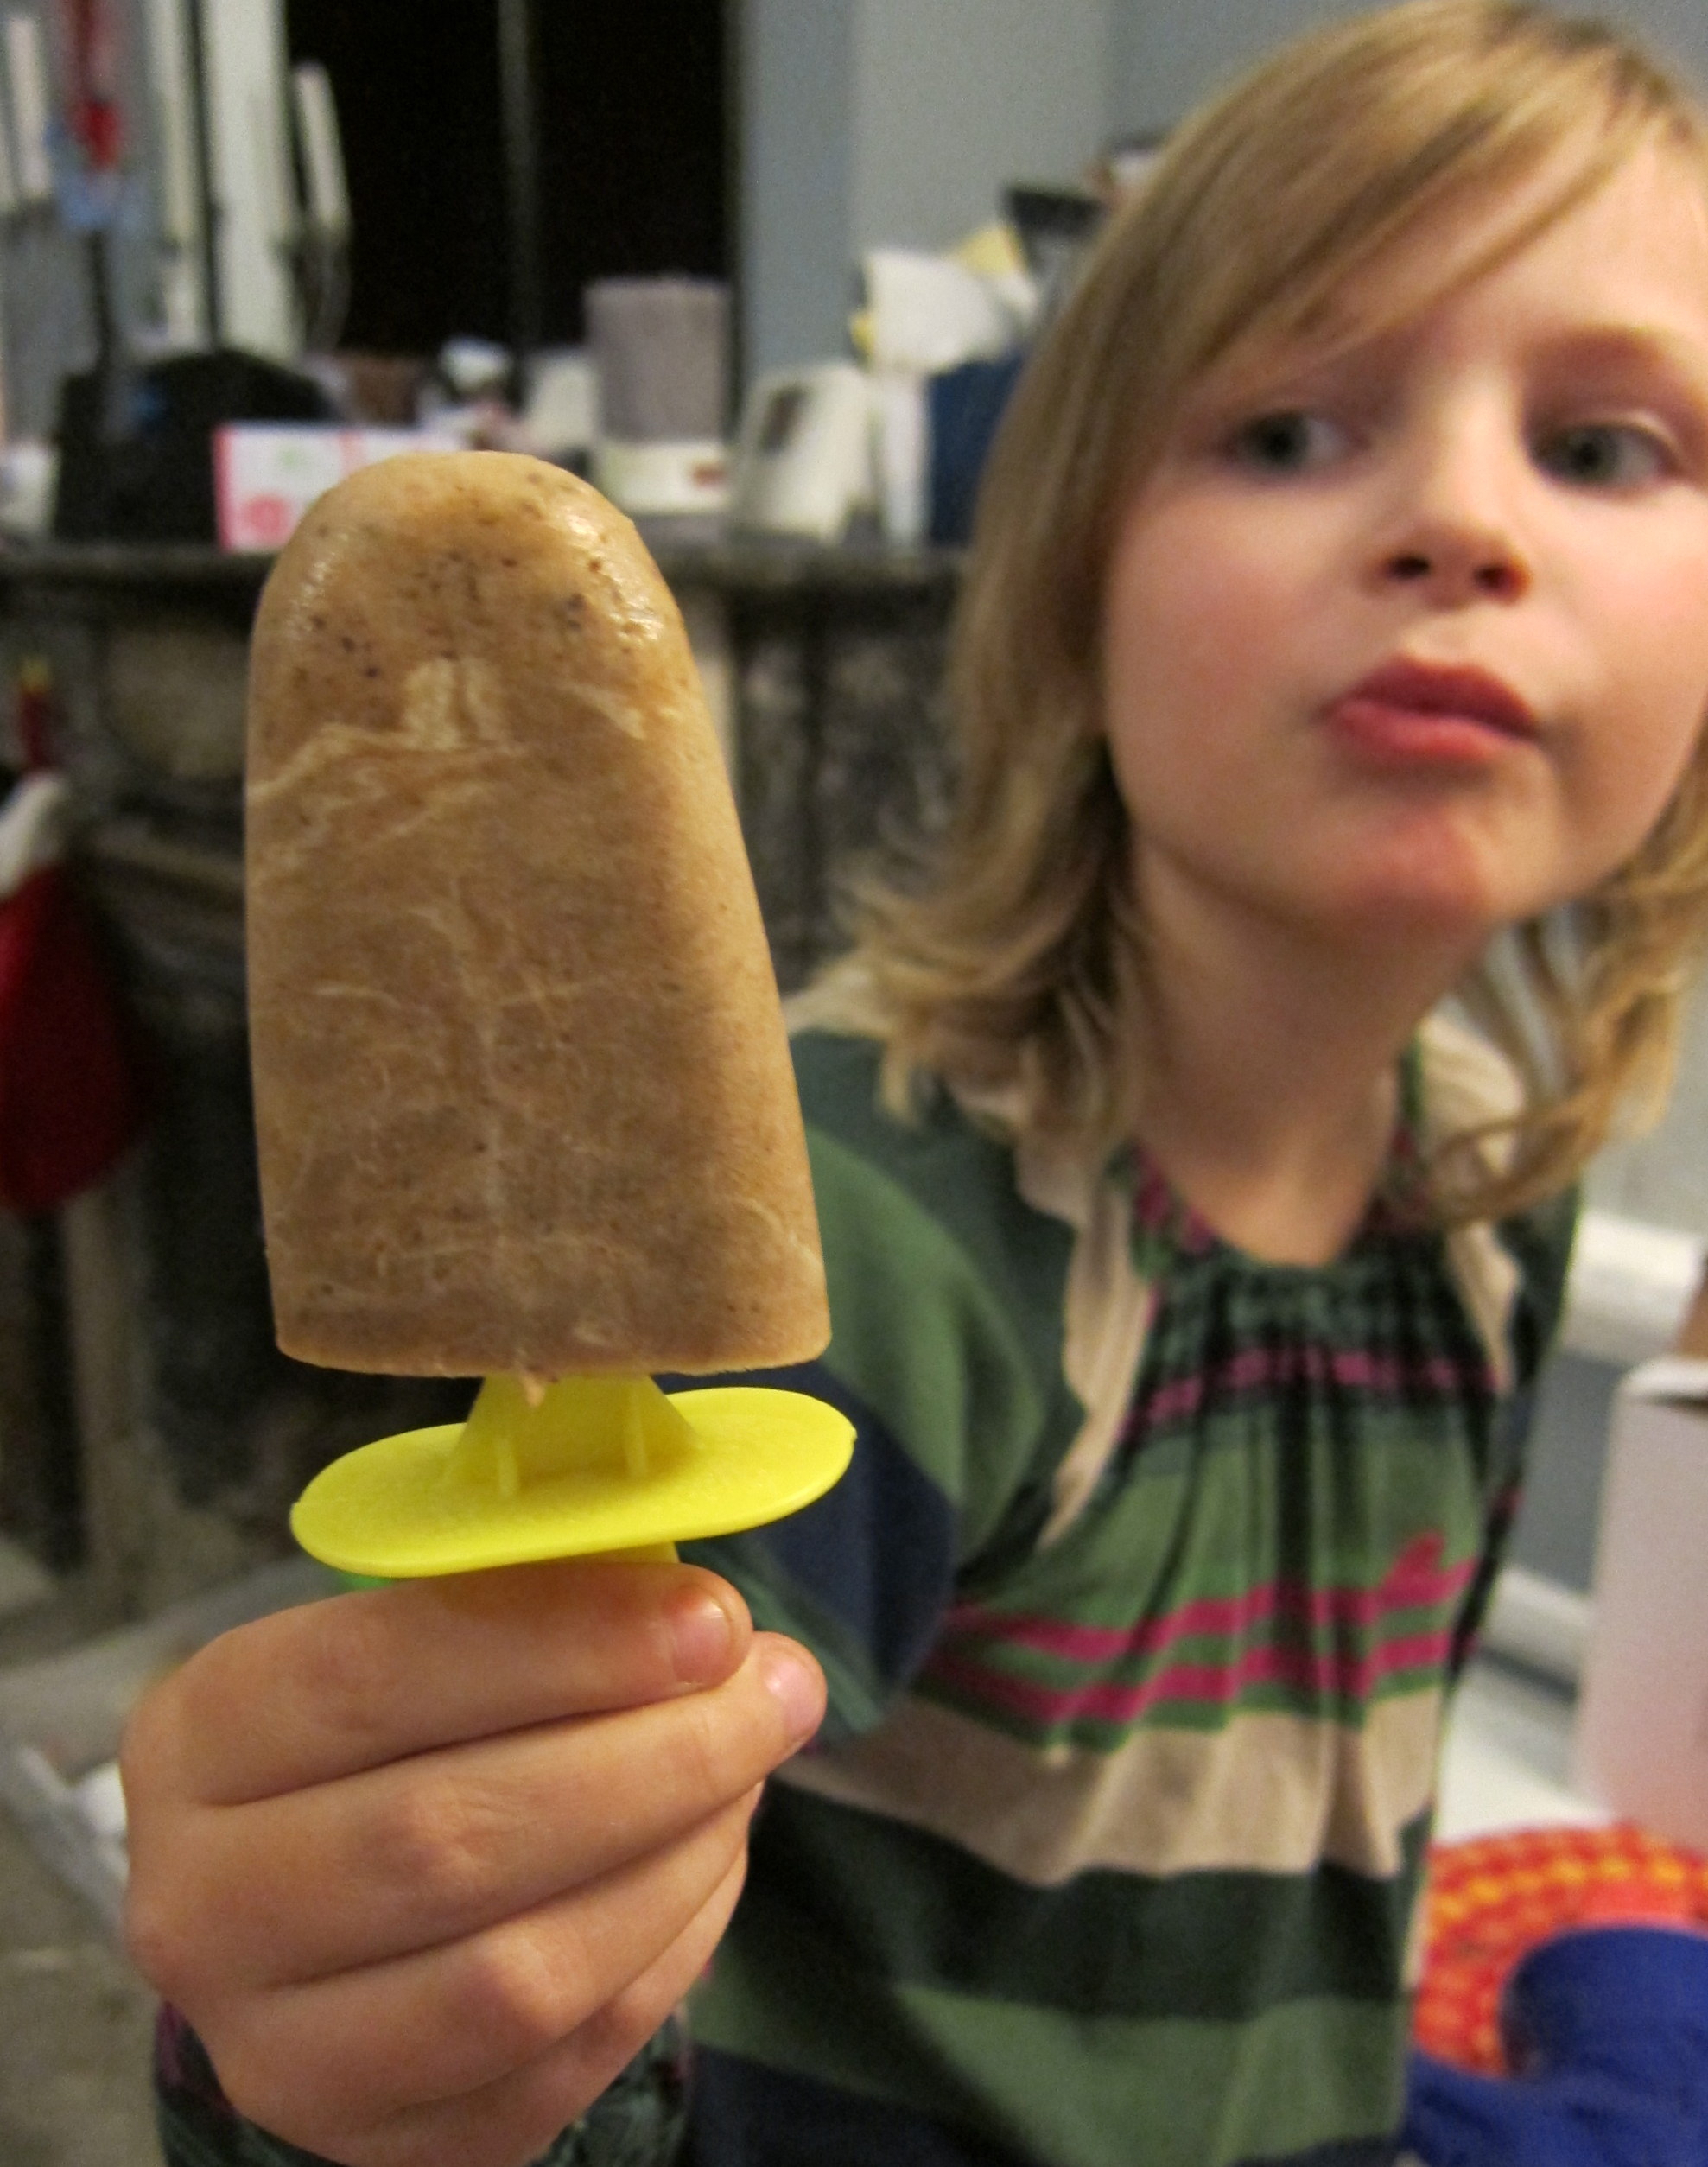 Prune frozen yoghurt - perfect for ice popsicles!